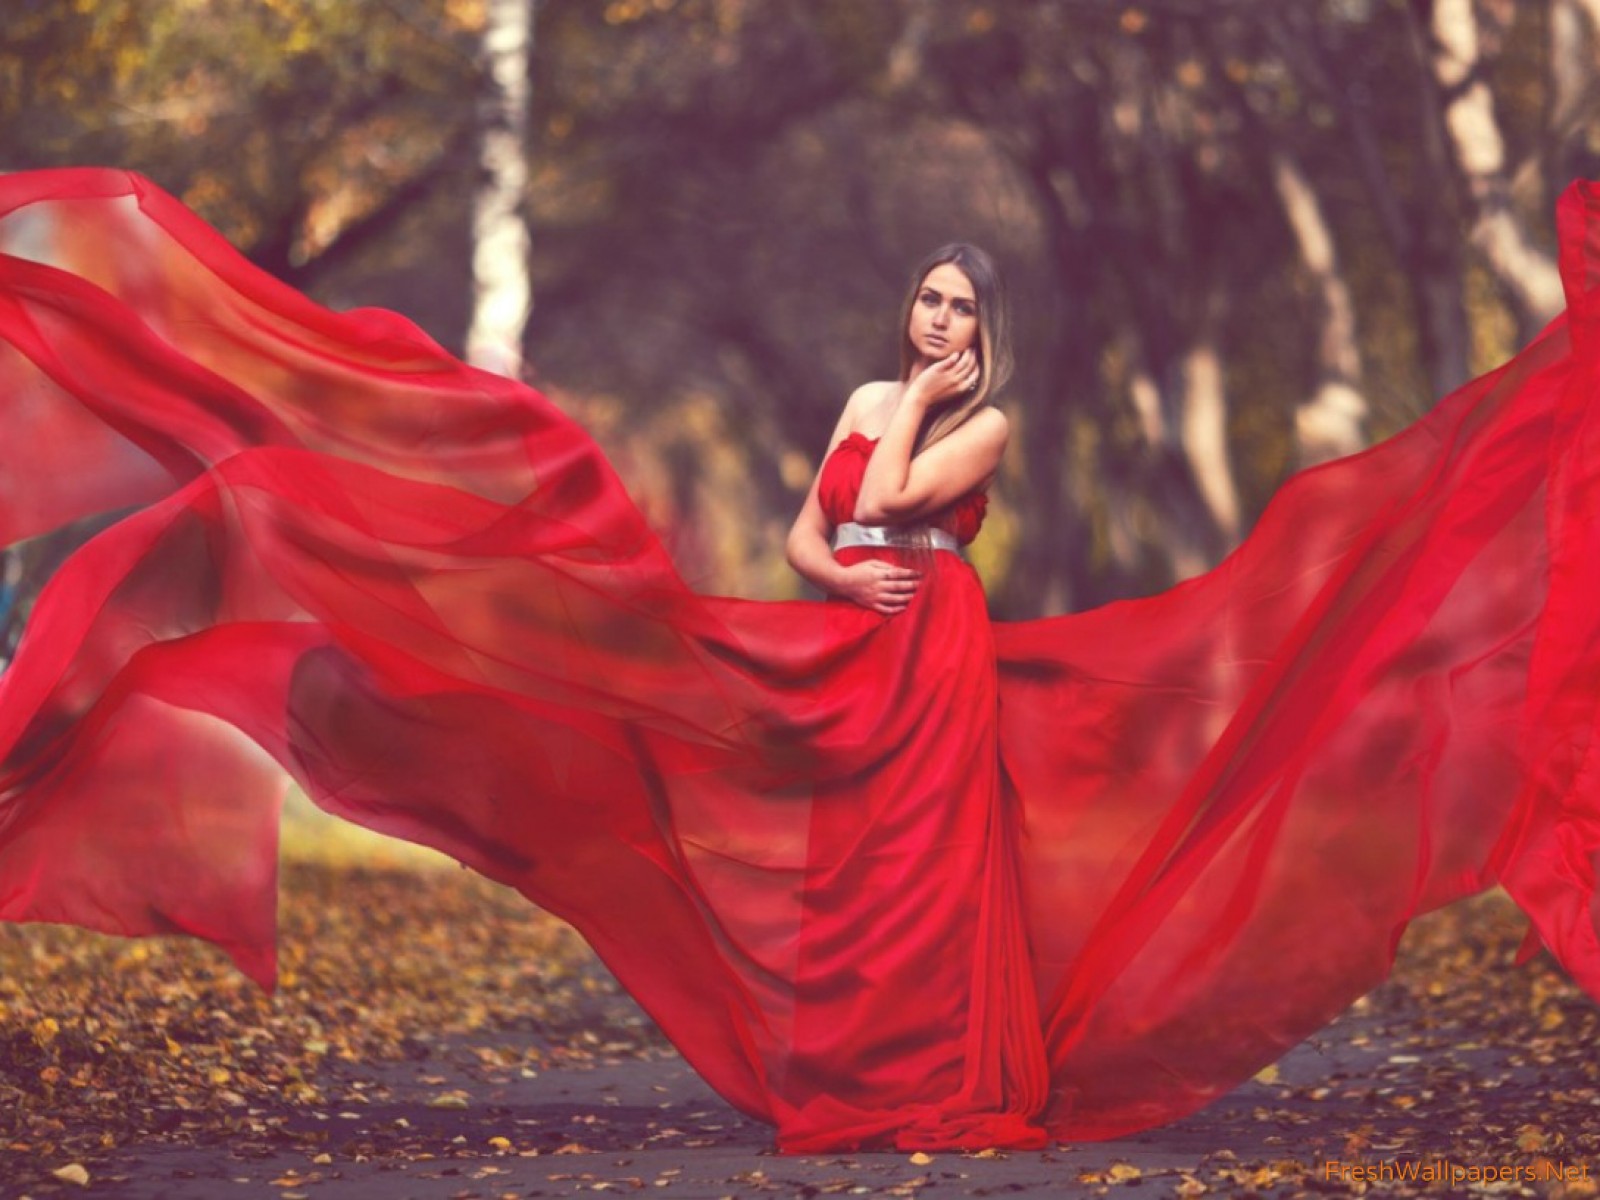 girl in red dress wallpapers | Freshwallpapers